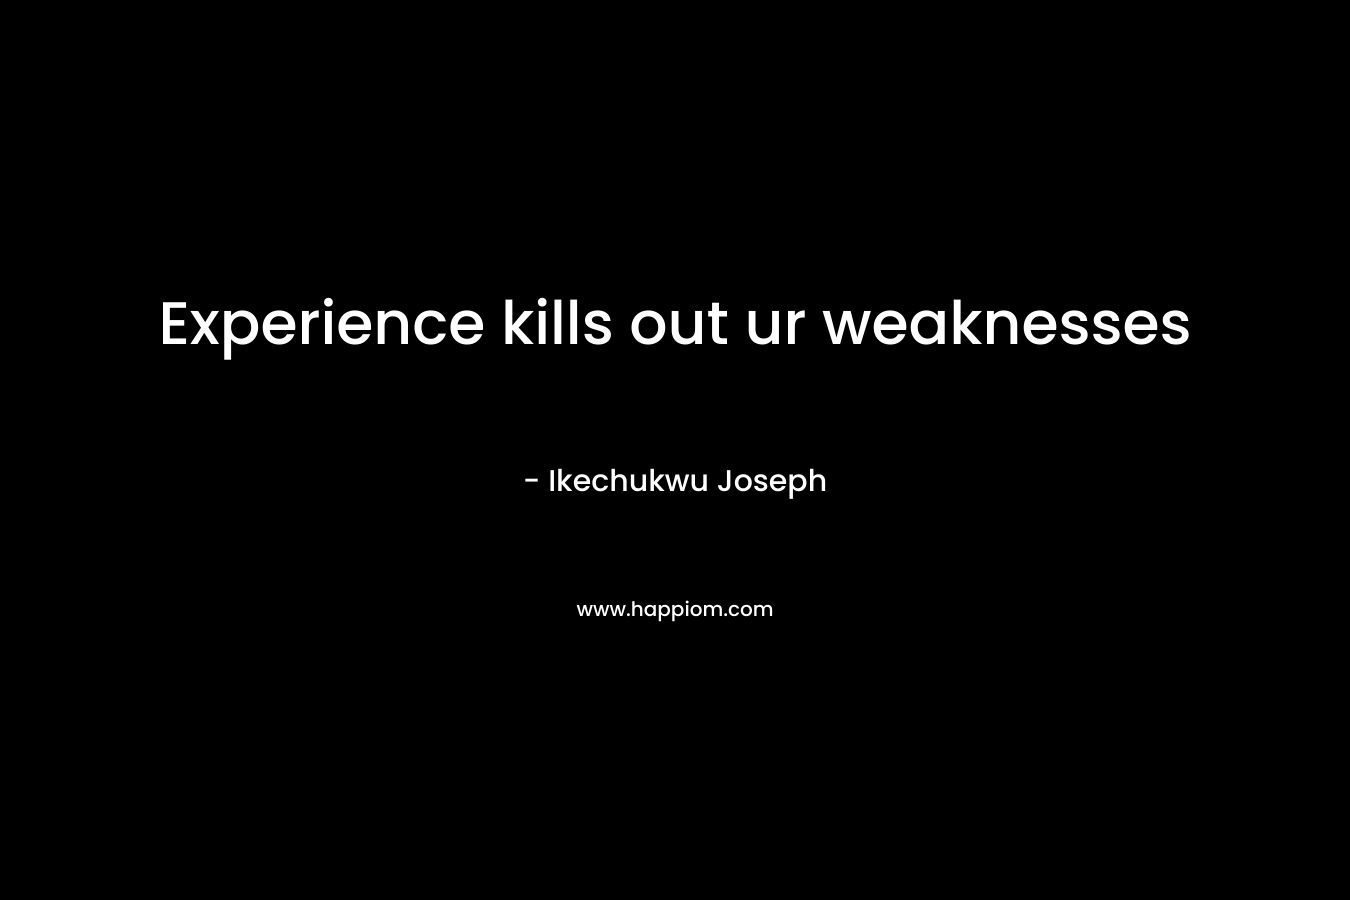 Experience kills out ur weaknesses